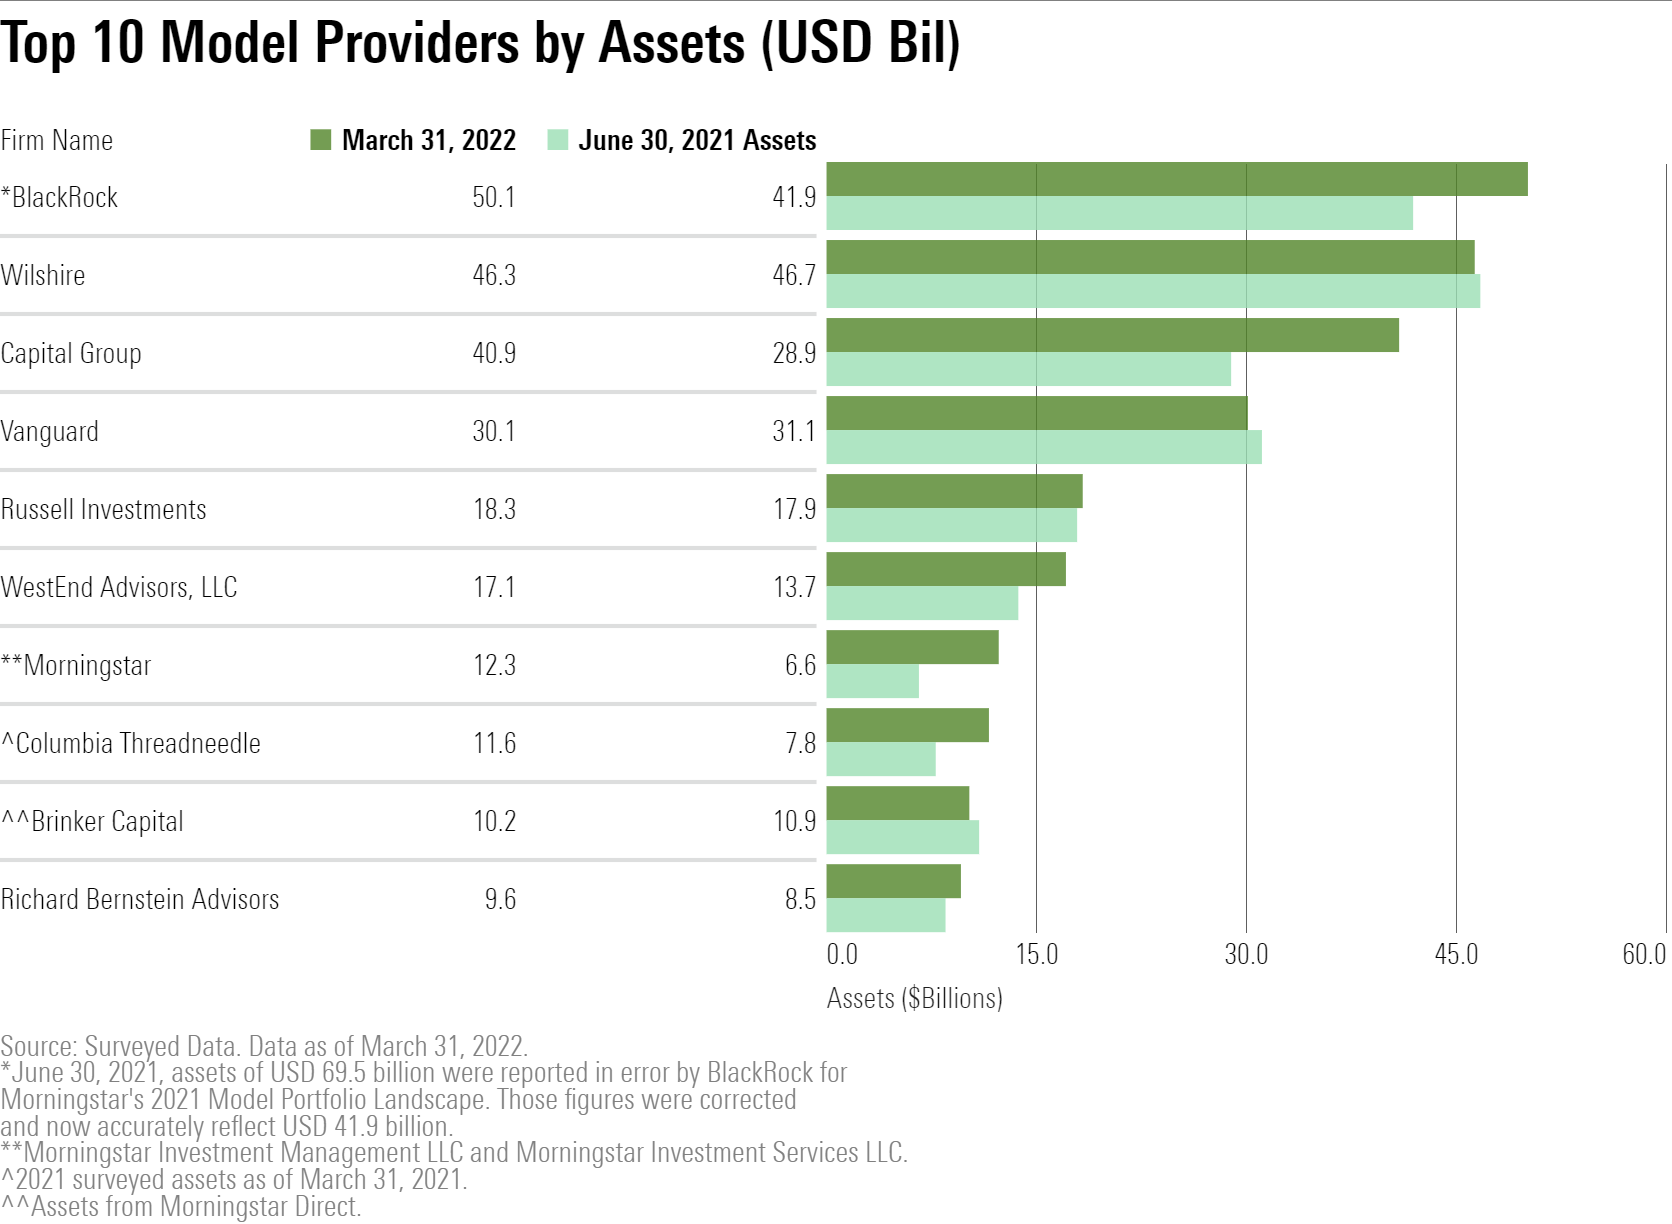 A bar chart of the top 10 providers of model portfolios by assets as of March 31, 2022.